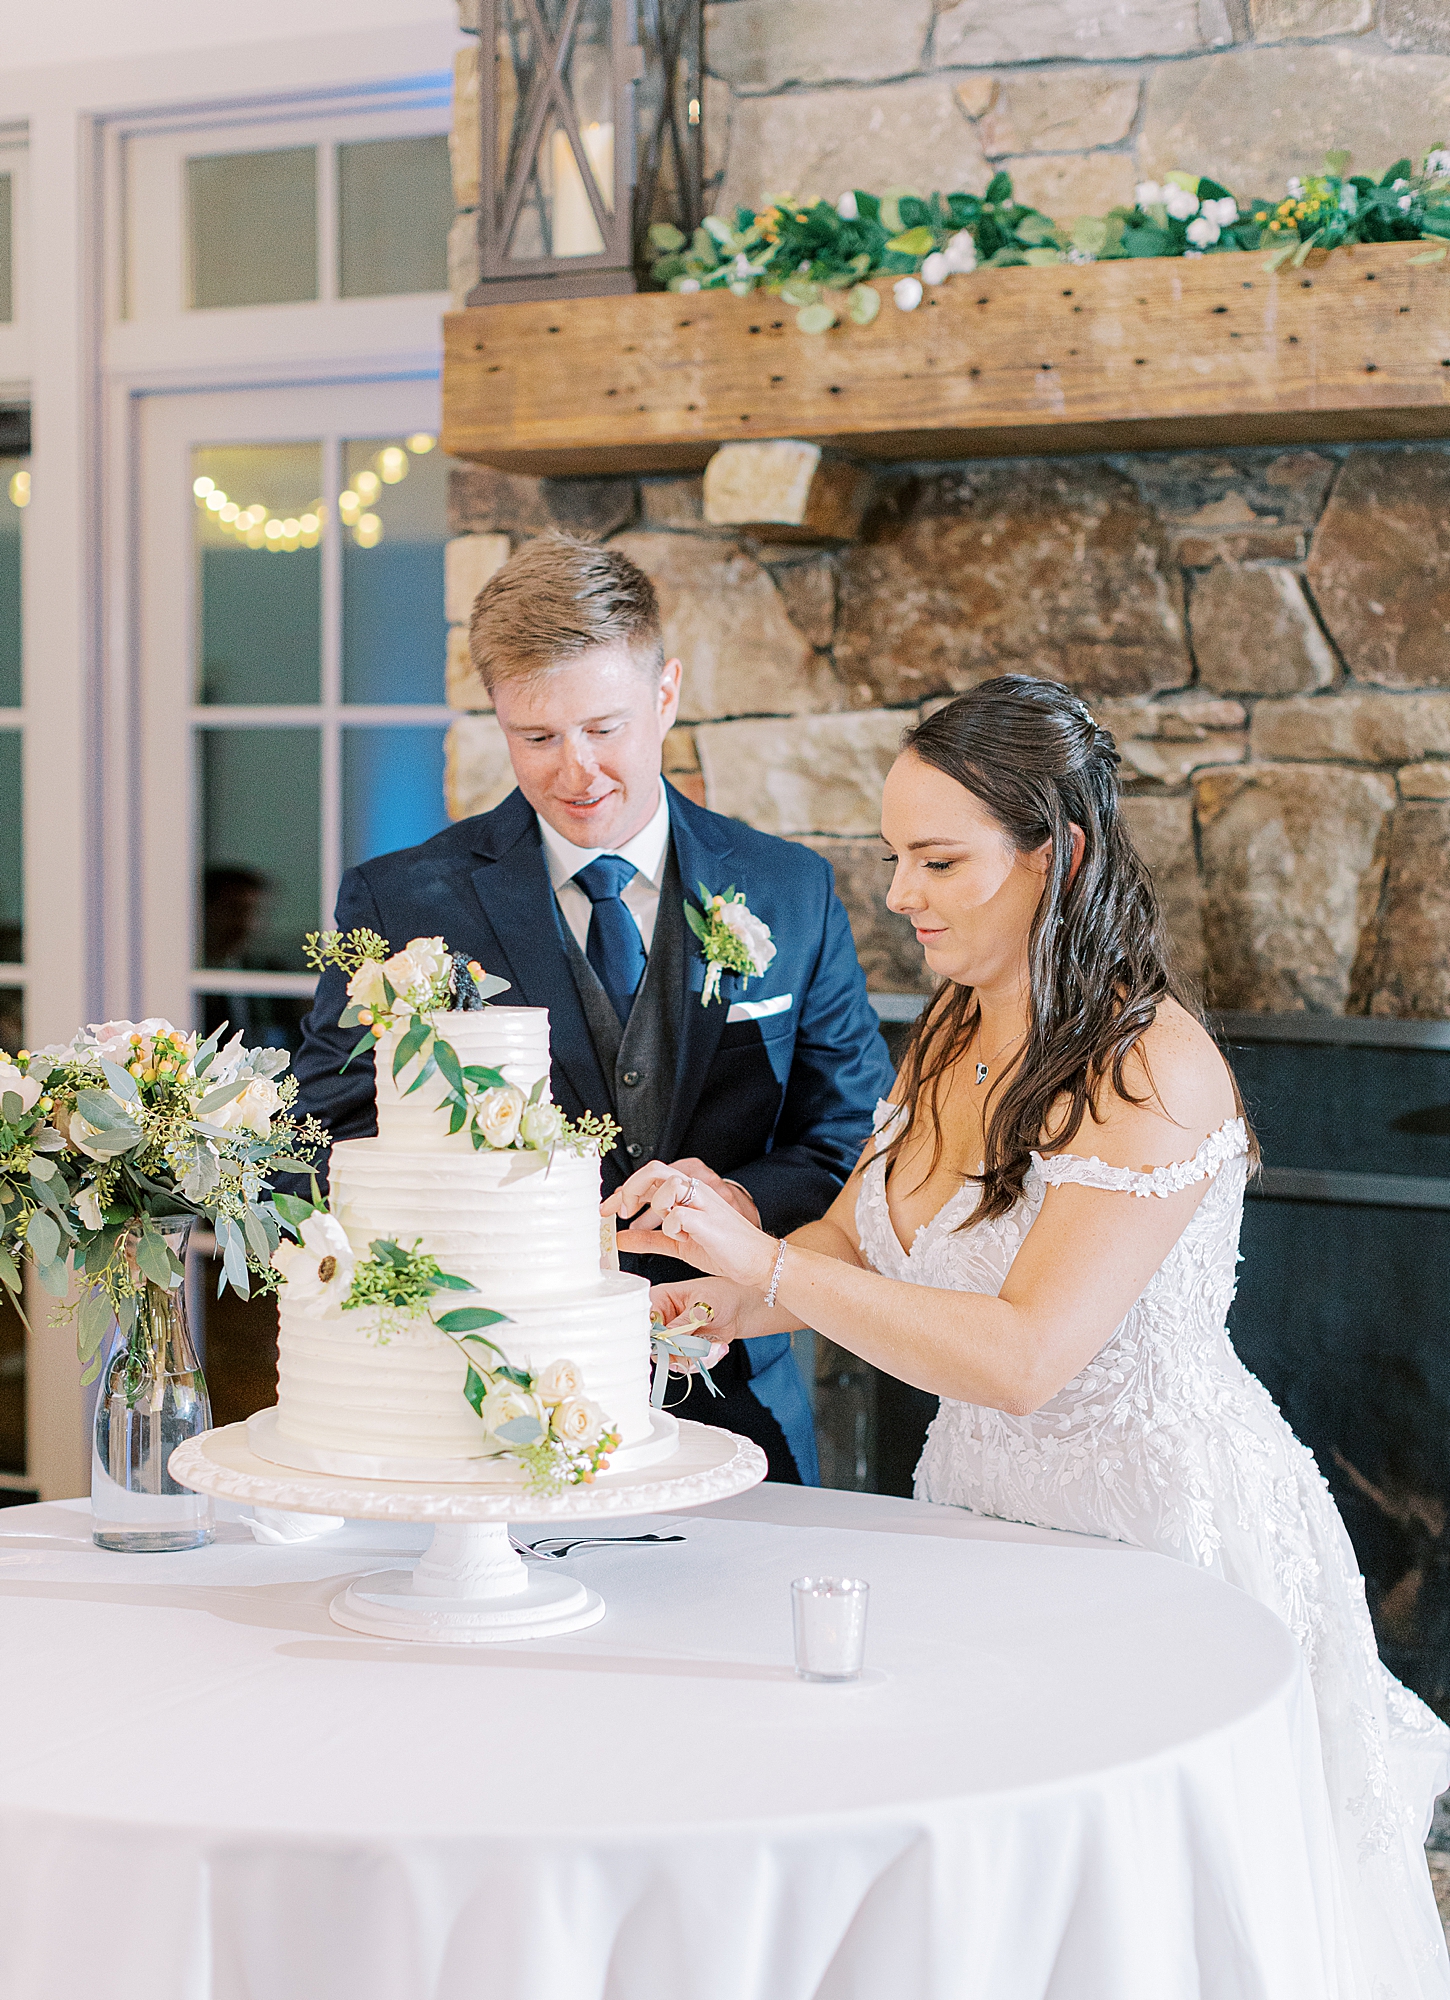 Bride and groom cutting cake made by Passionflower Cakes at King Family Vineyards wedding.